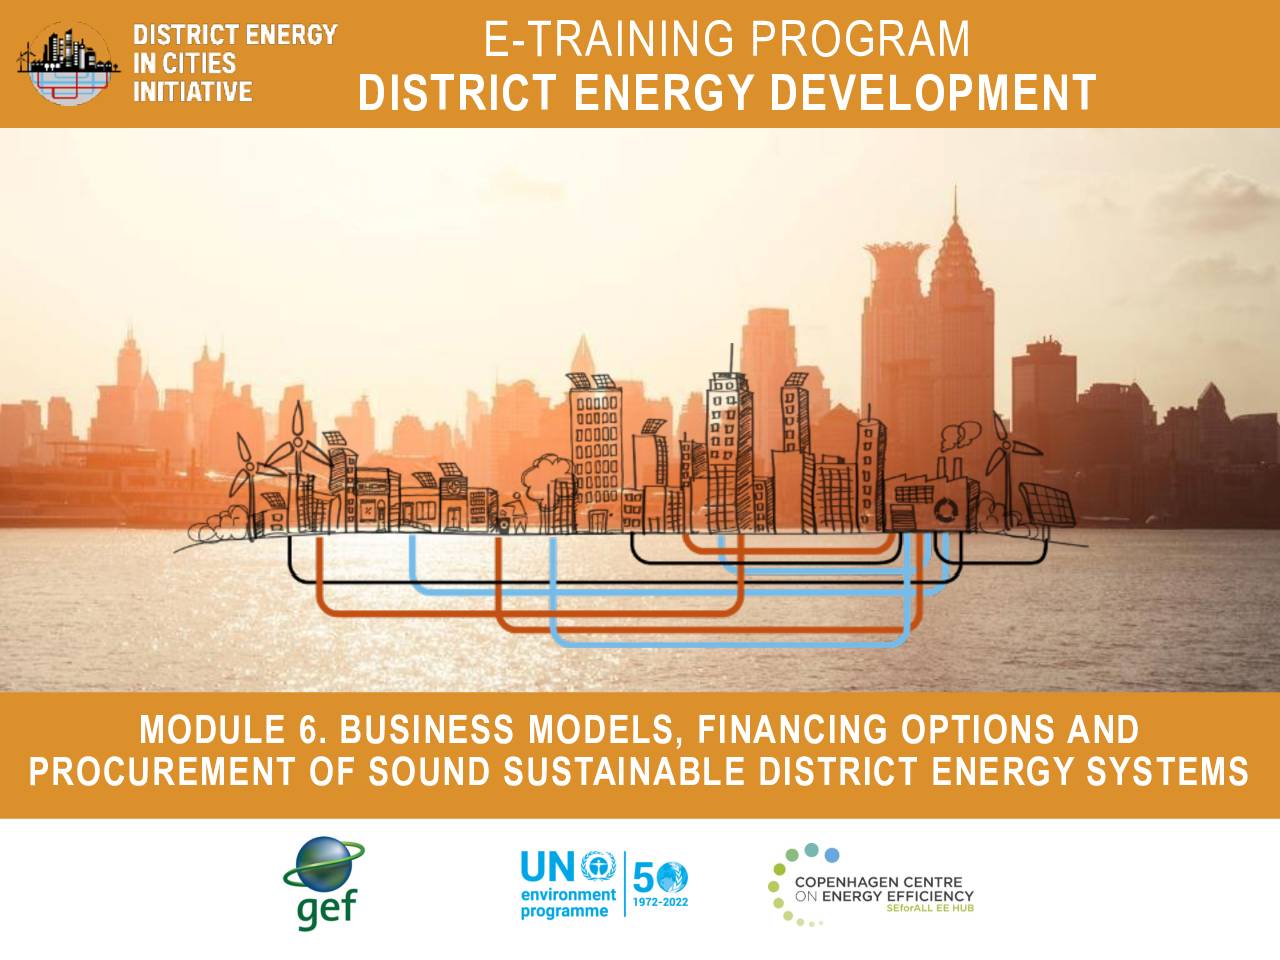 Module 6 – Business models for sound sustainable district energy systems